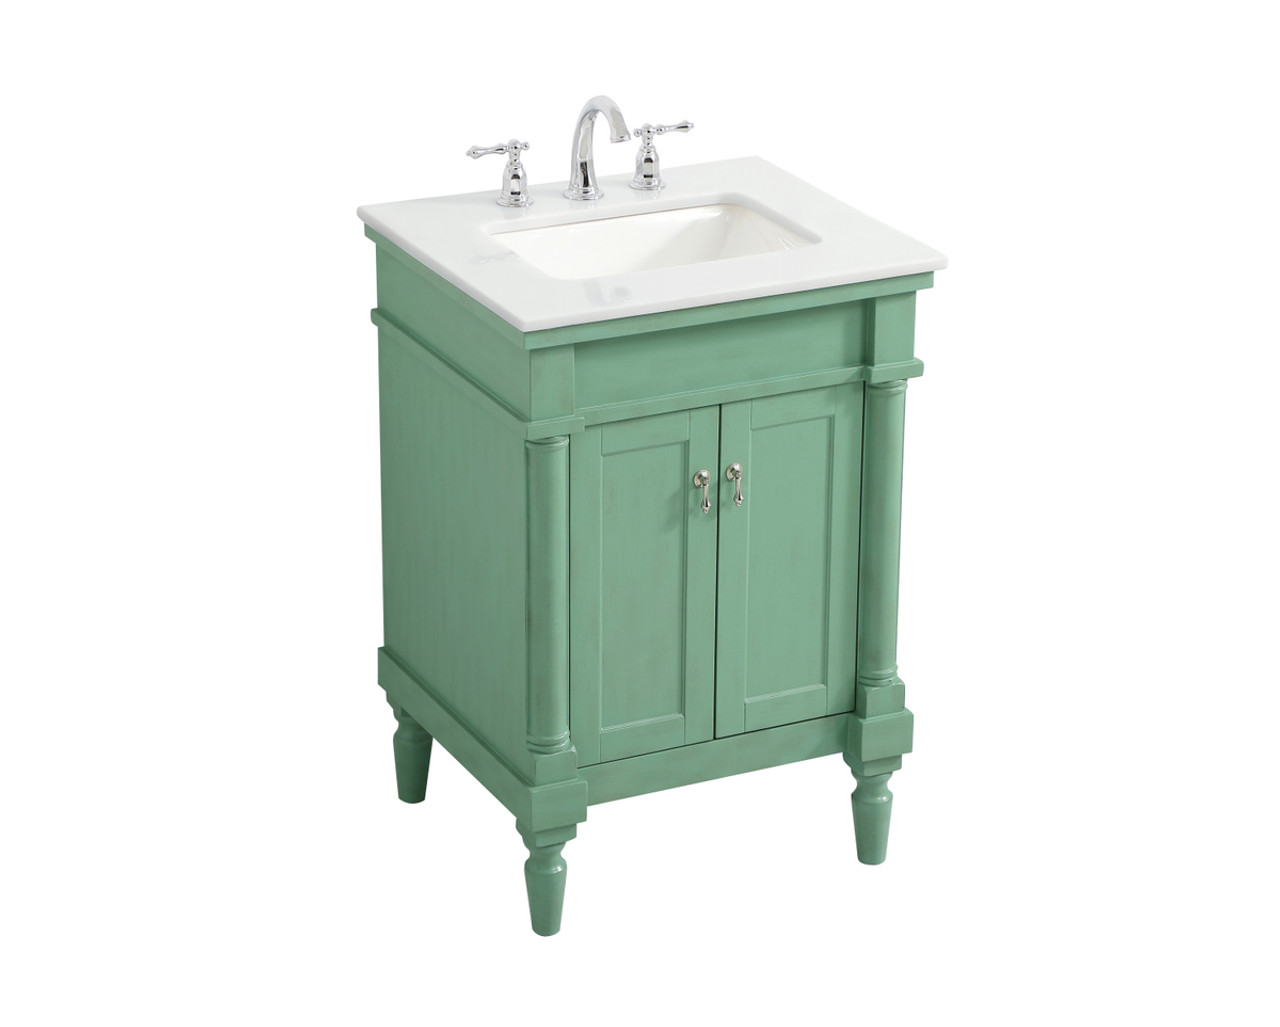 Elegant Kitchen and Bath VF13024VM-VW 24 inch Single Bathroom vanity in vintage mint with ivory white engineered marble